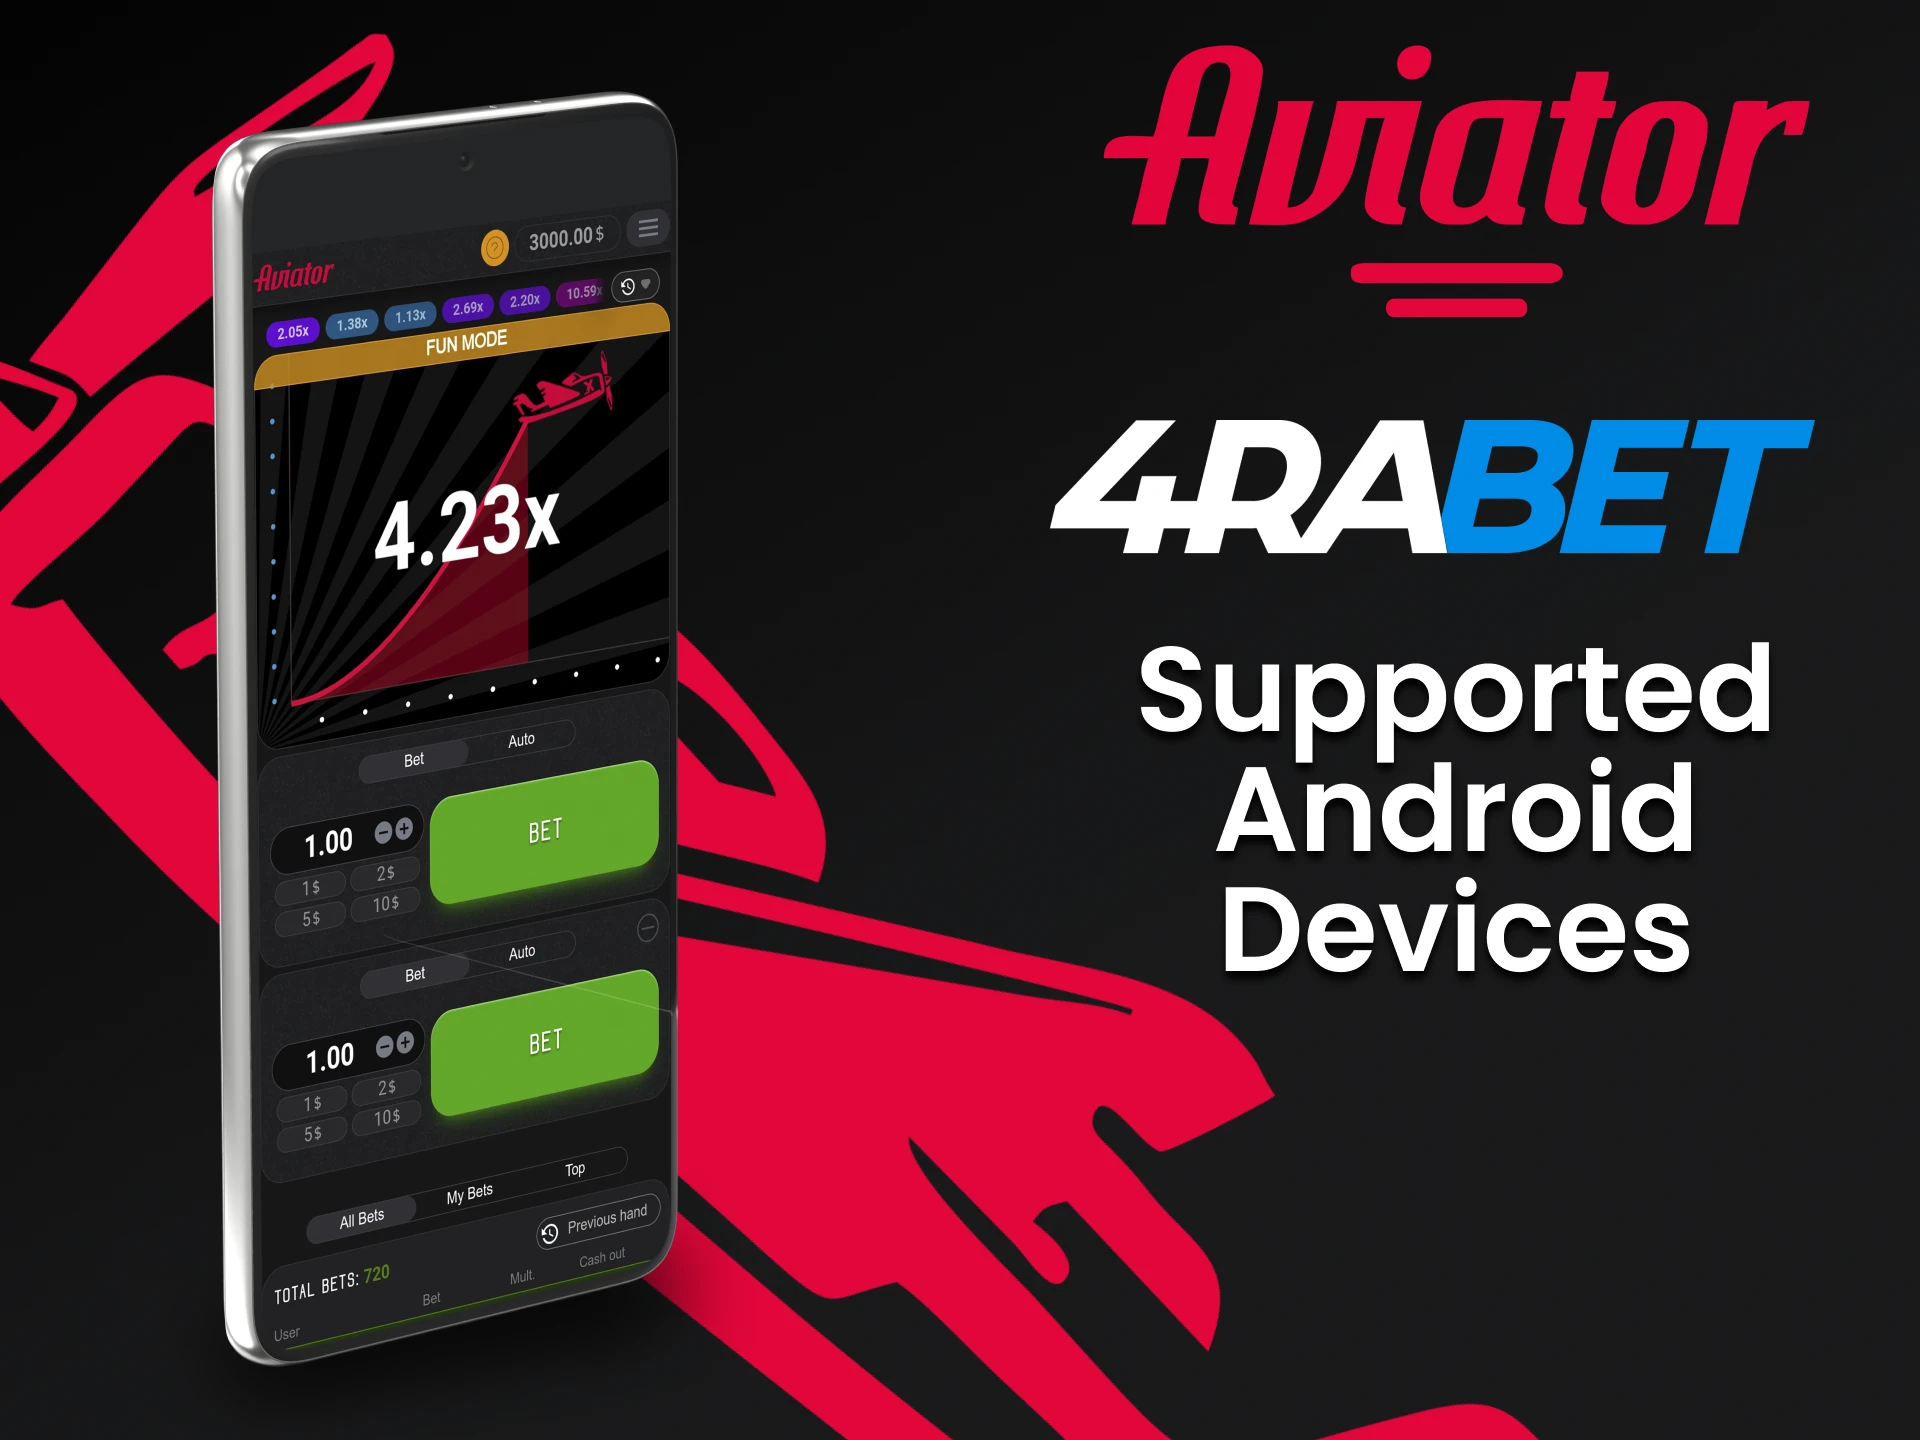 Play Aviator on android devices.